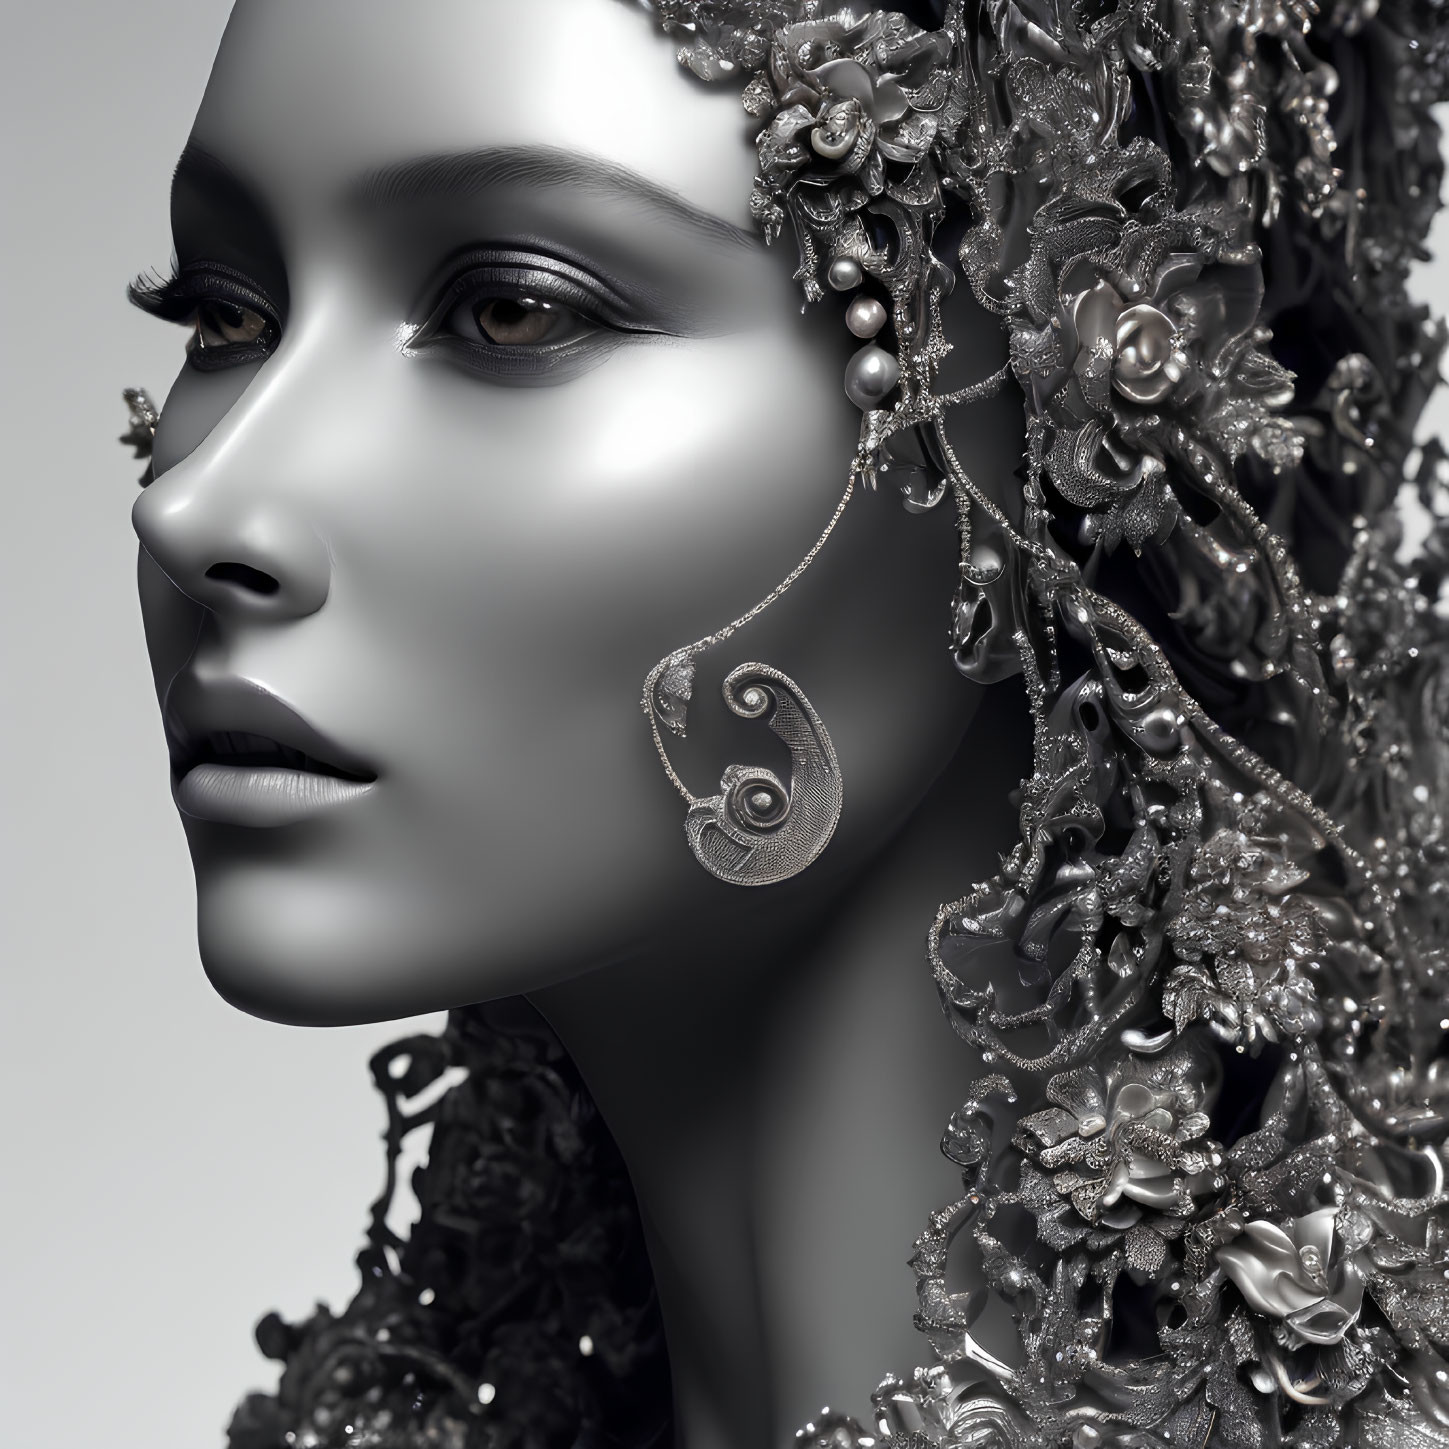 Monochromatic female figure with floral headpiece and jewelry, detailed textures and serene expression